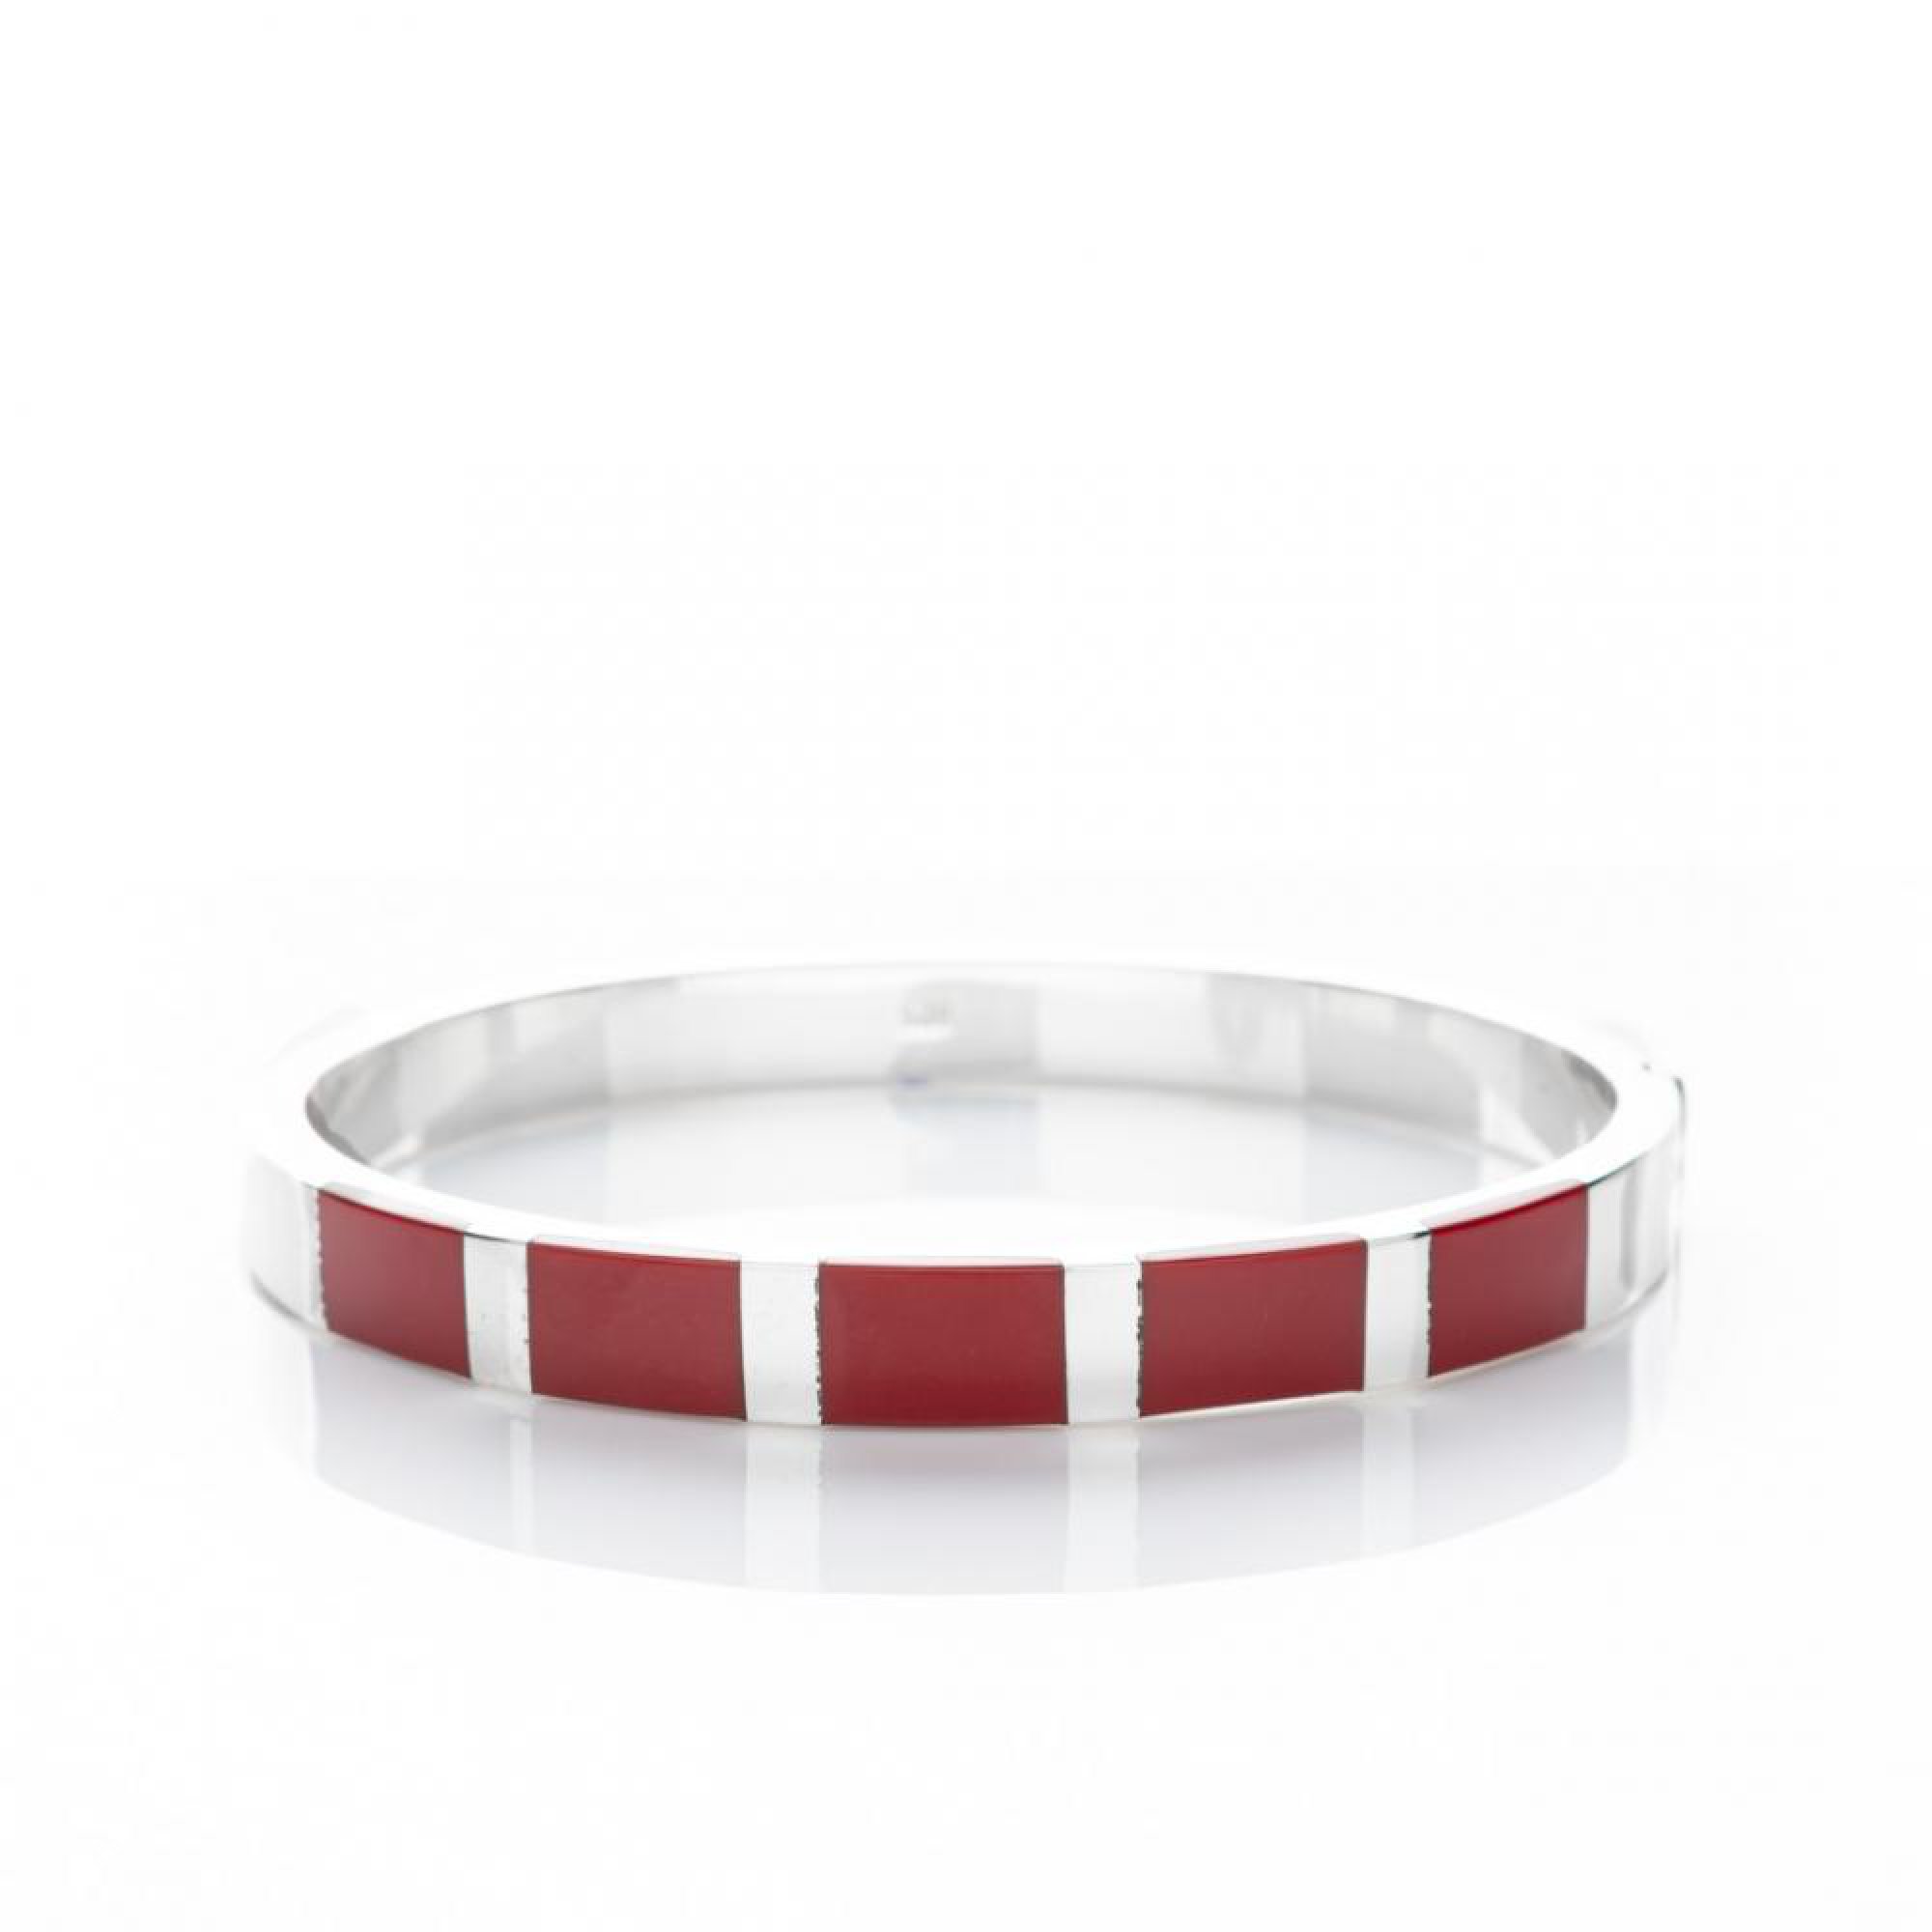 Bangle bracelet with coral